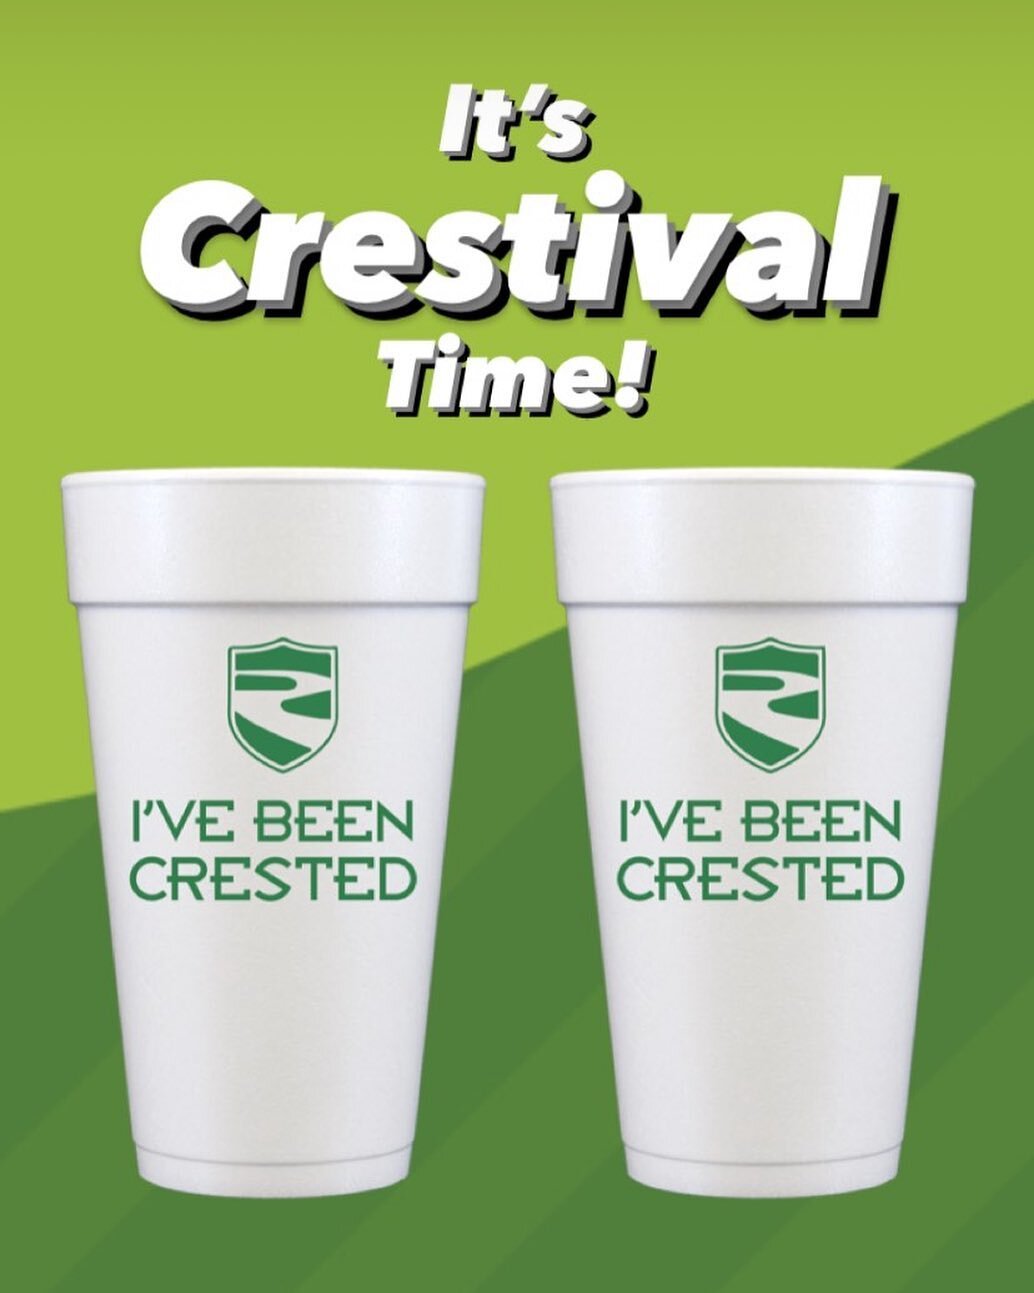 #itsworthnoting Crestival is almost here!  Follow the link in our bio or stories to buy your Crestival cups! 10 cups for $10  #crestivusfortherestofus #ivebeencrested